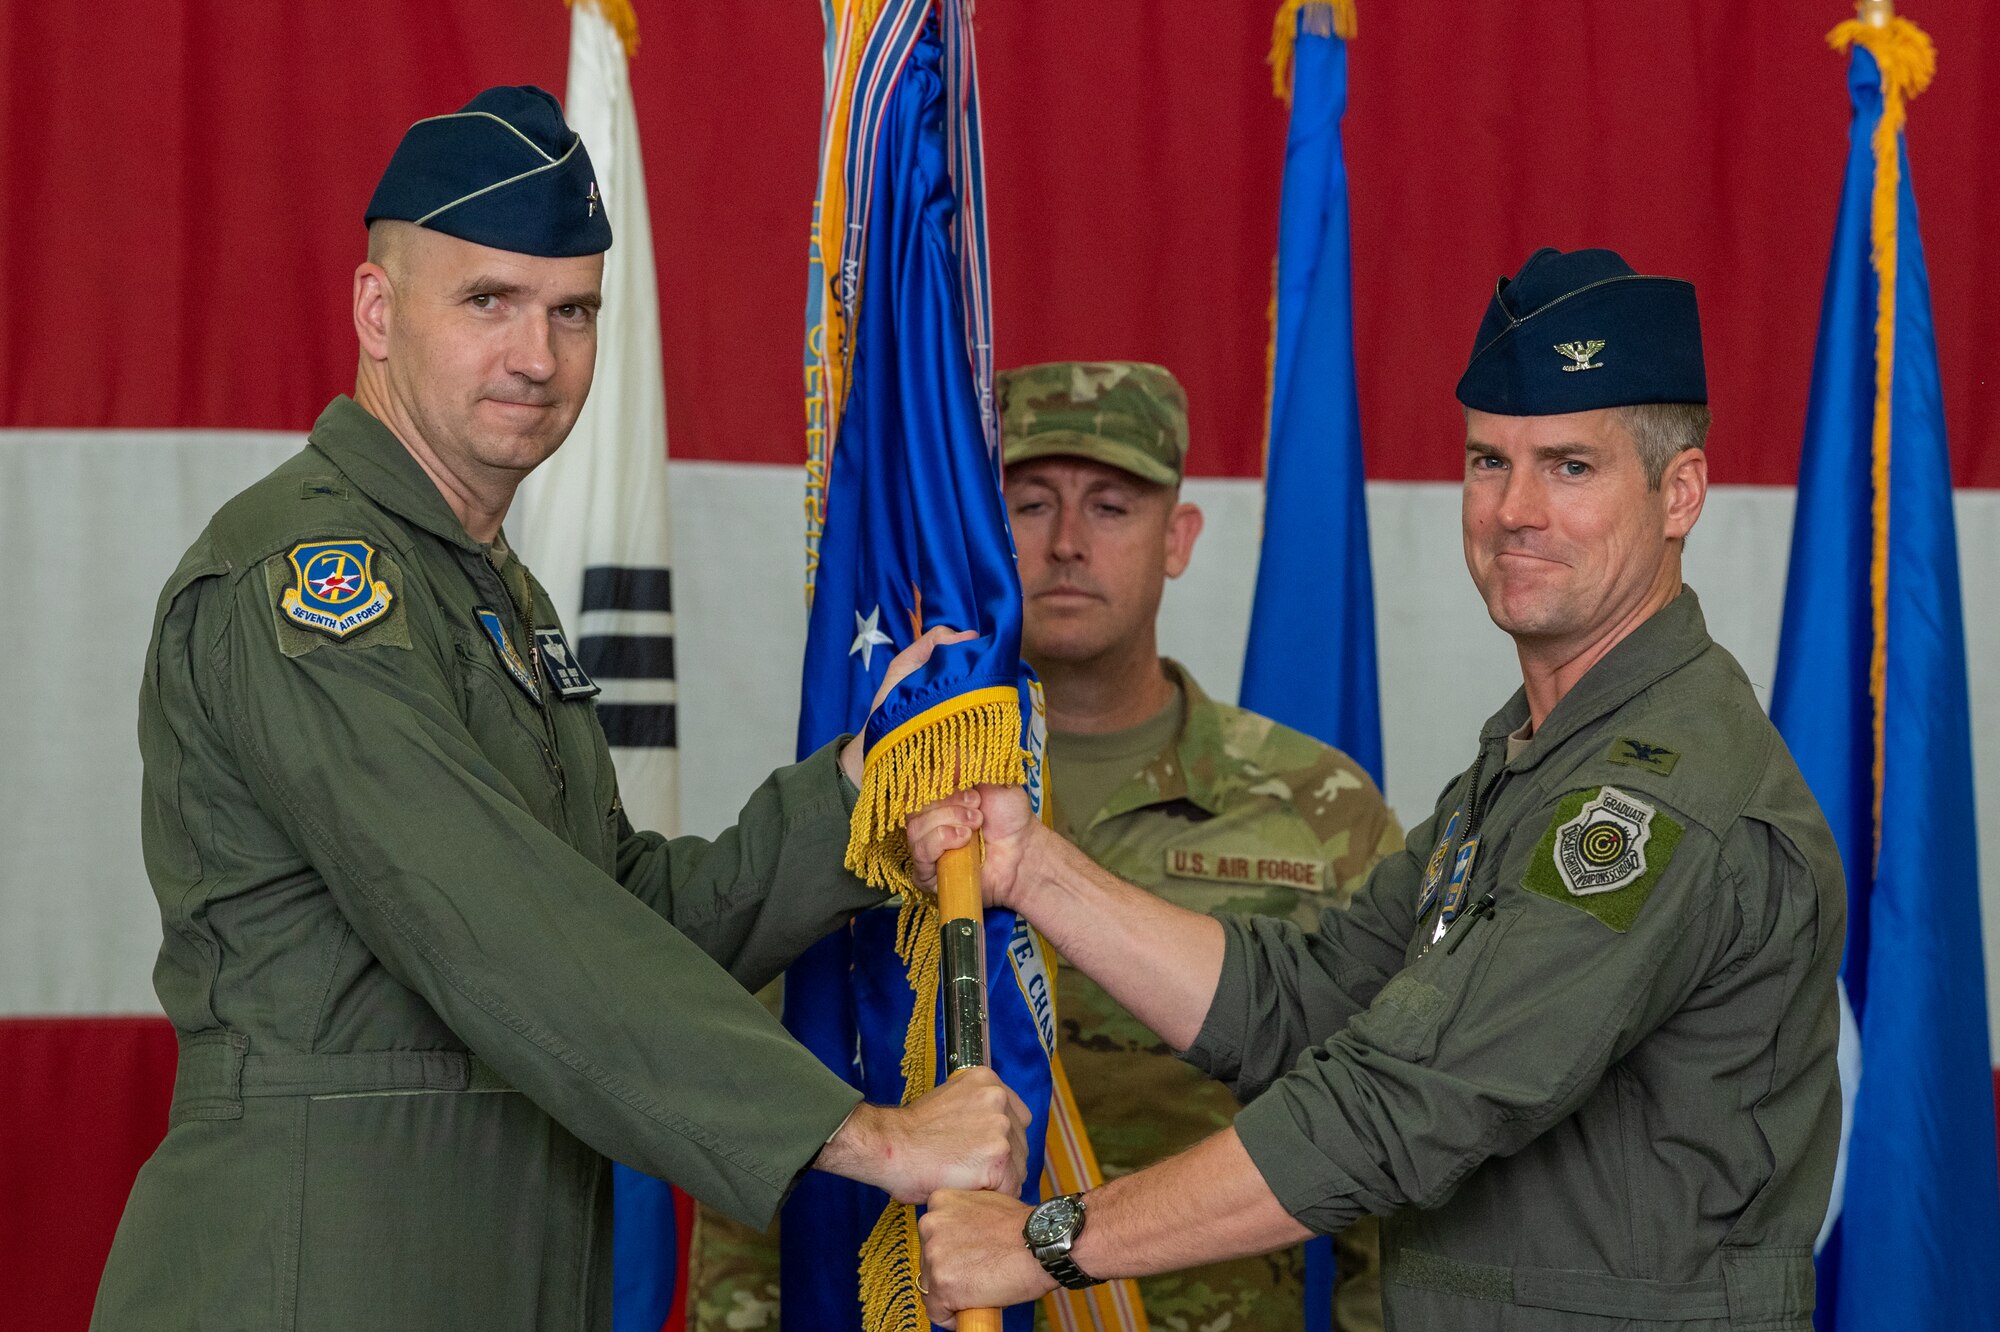 Photos of various leadership, Airmen at a wing-level change of command ceremony